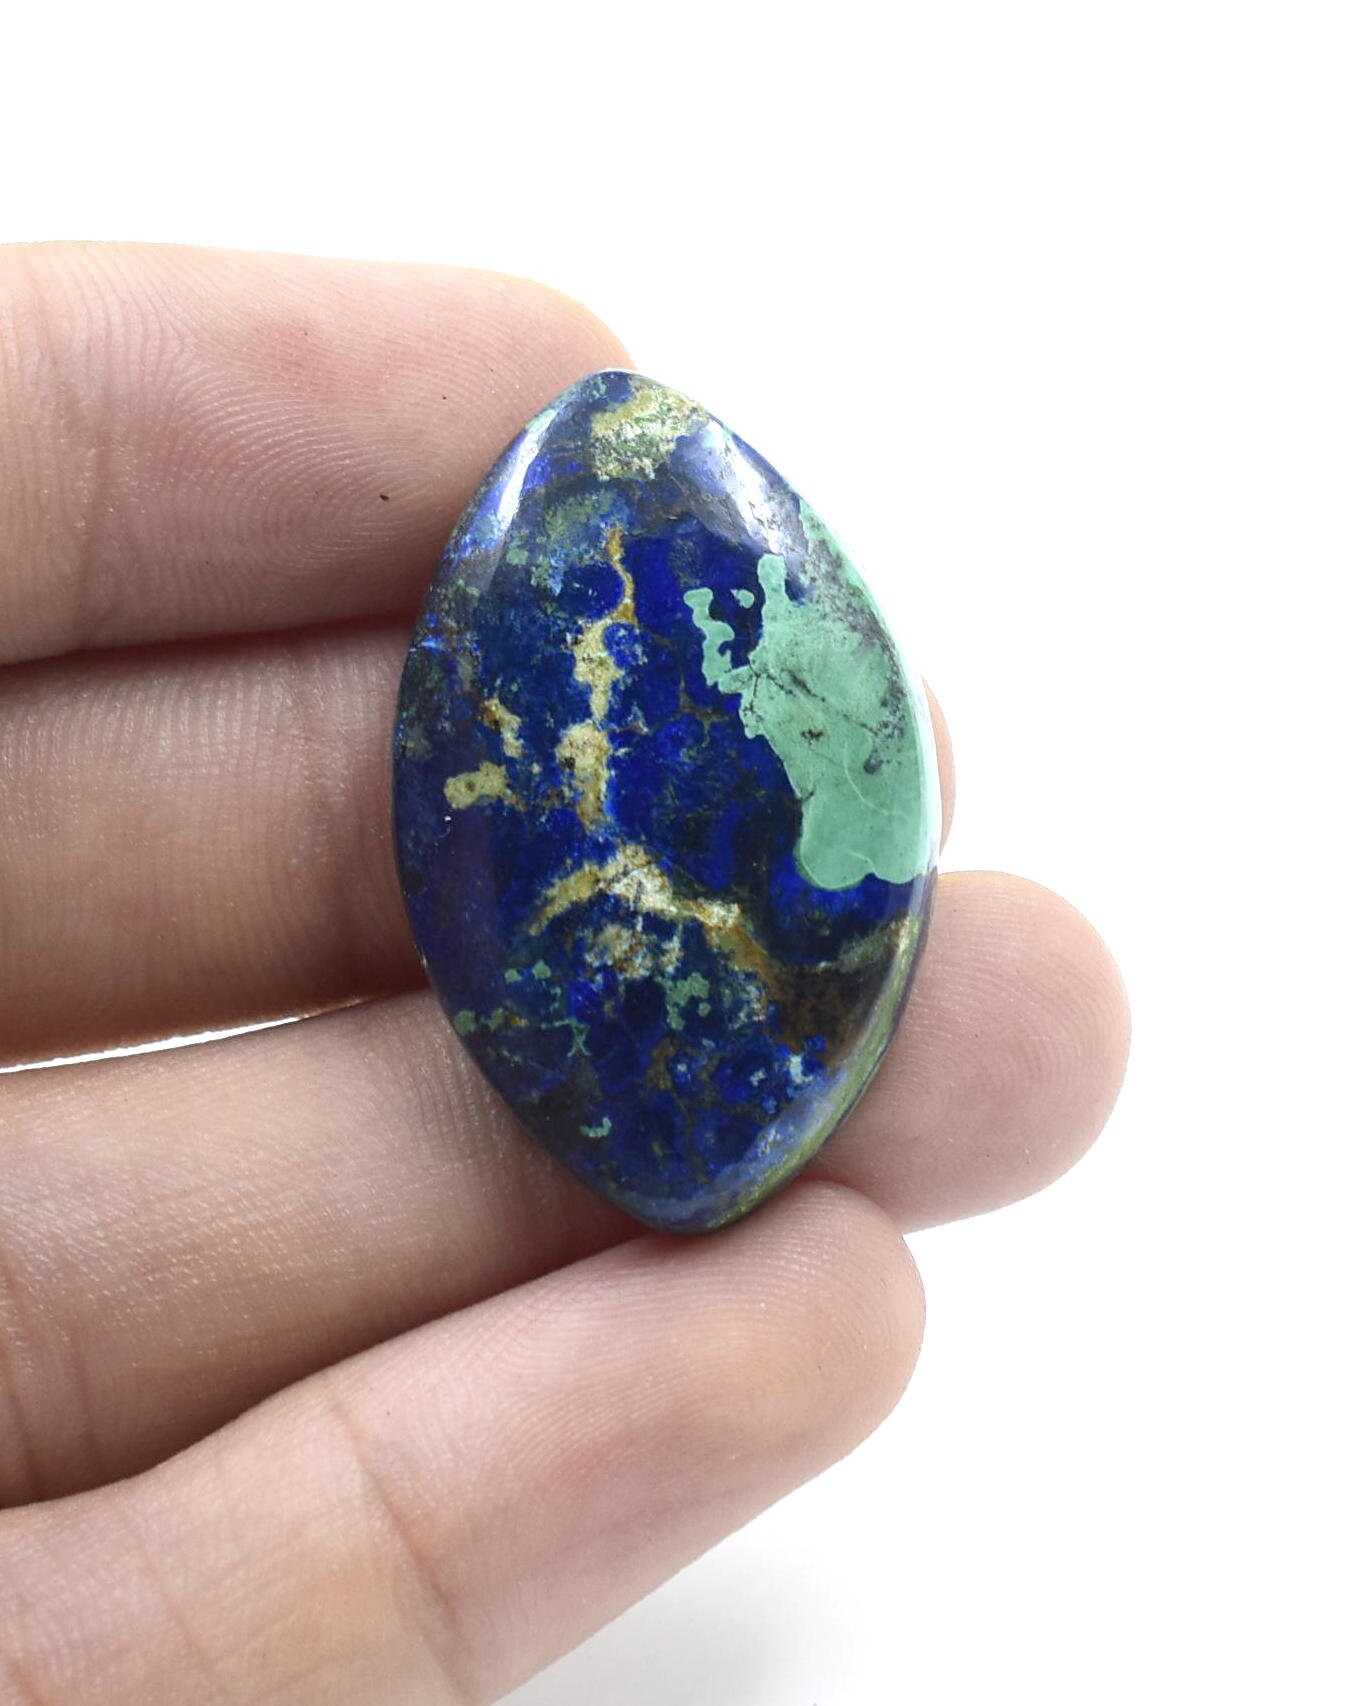 100% Natural Azurite Malachite Cabochon Good quality stone Beautiful Art Making for jewellery Ring 43.60 CARAT 33X21 MM | Save 33% - Rajasthan Living 11